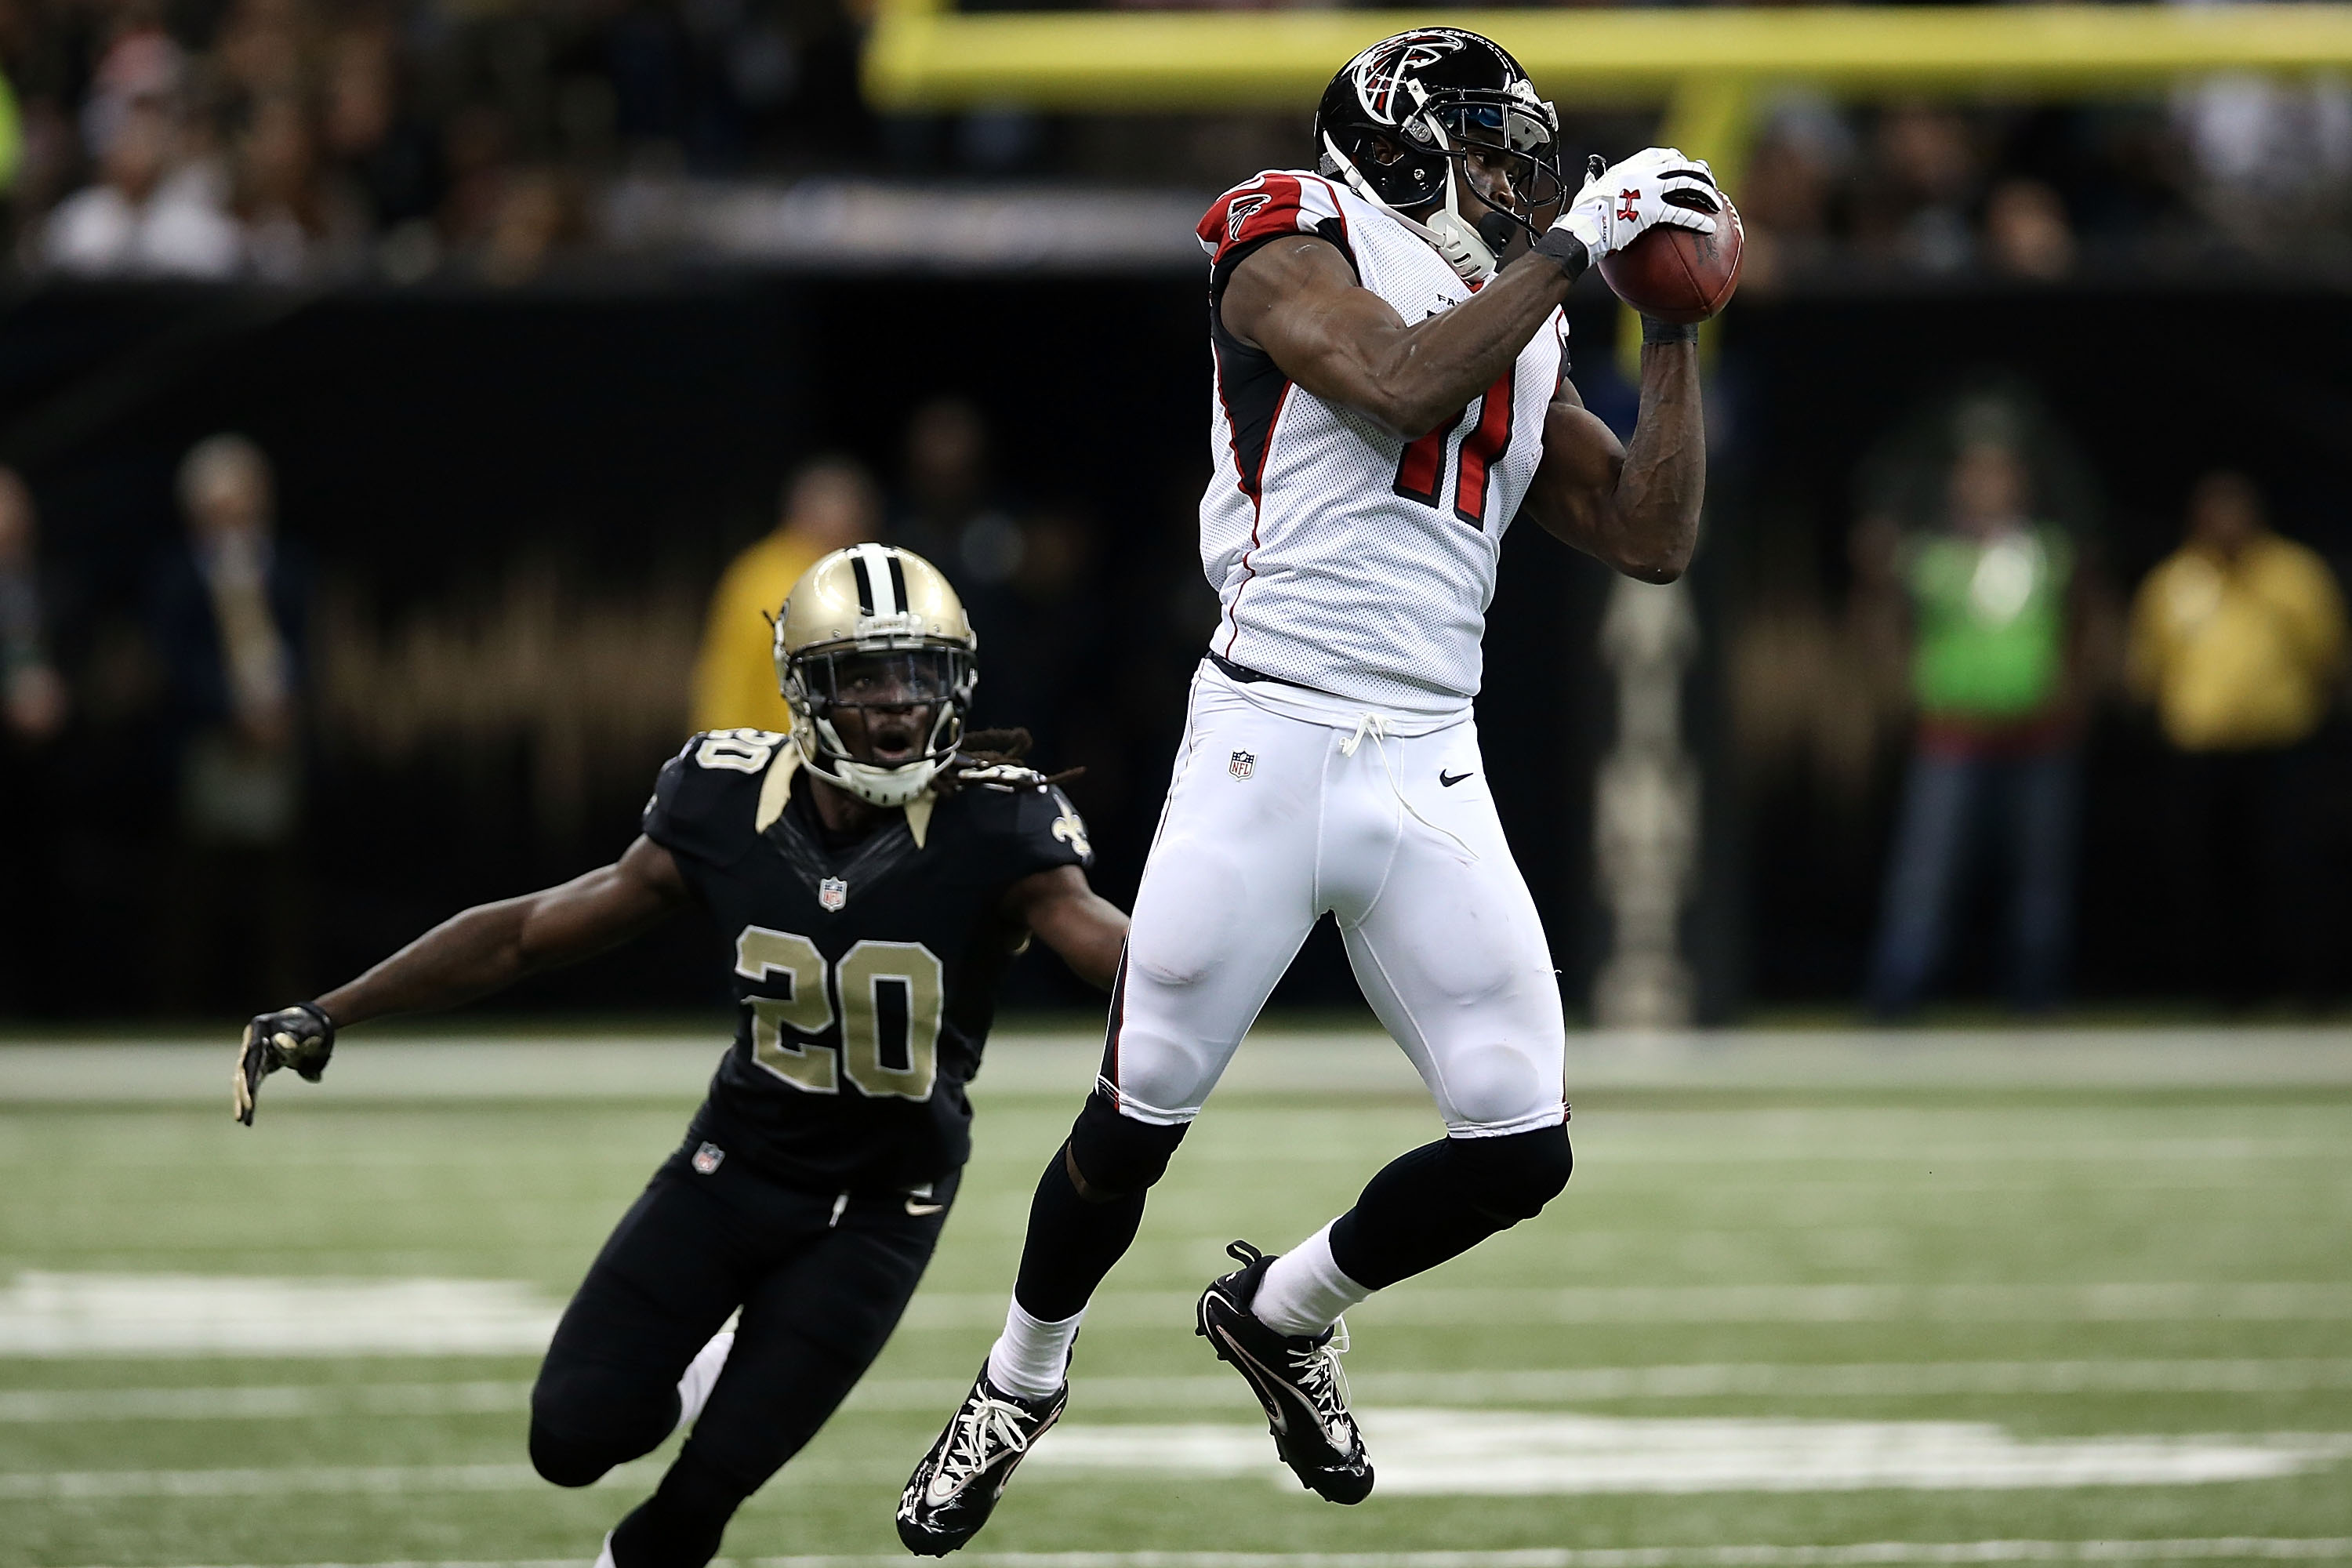 NEW ORLEANS, LA - DECEMBER 21:  Julio Jones #11 of the Atlanta Falcons catches a pass in front of A.J. Davis #20 of the New Orleans Saints during the fourth quarter of a game at the Mercedes-Benz Superdome on December 21, 2014 in New Orleans, Louisiana.  (Photo by Chris Graythen/Getty Images)